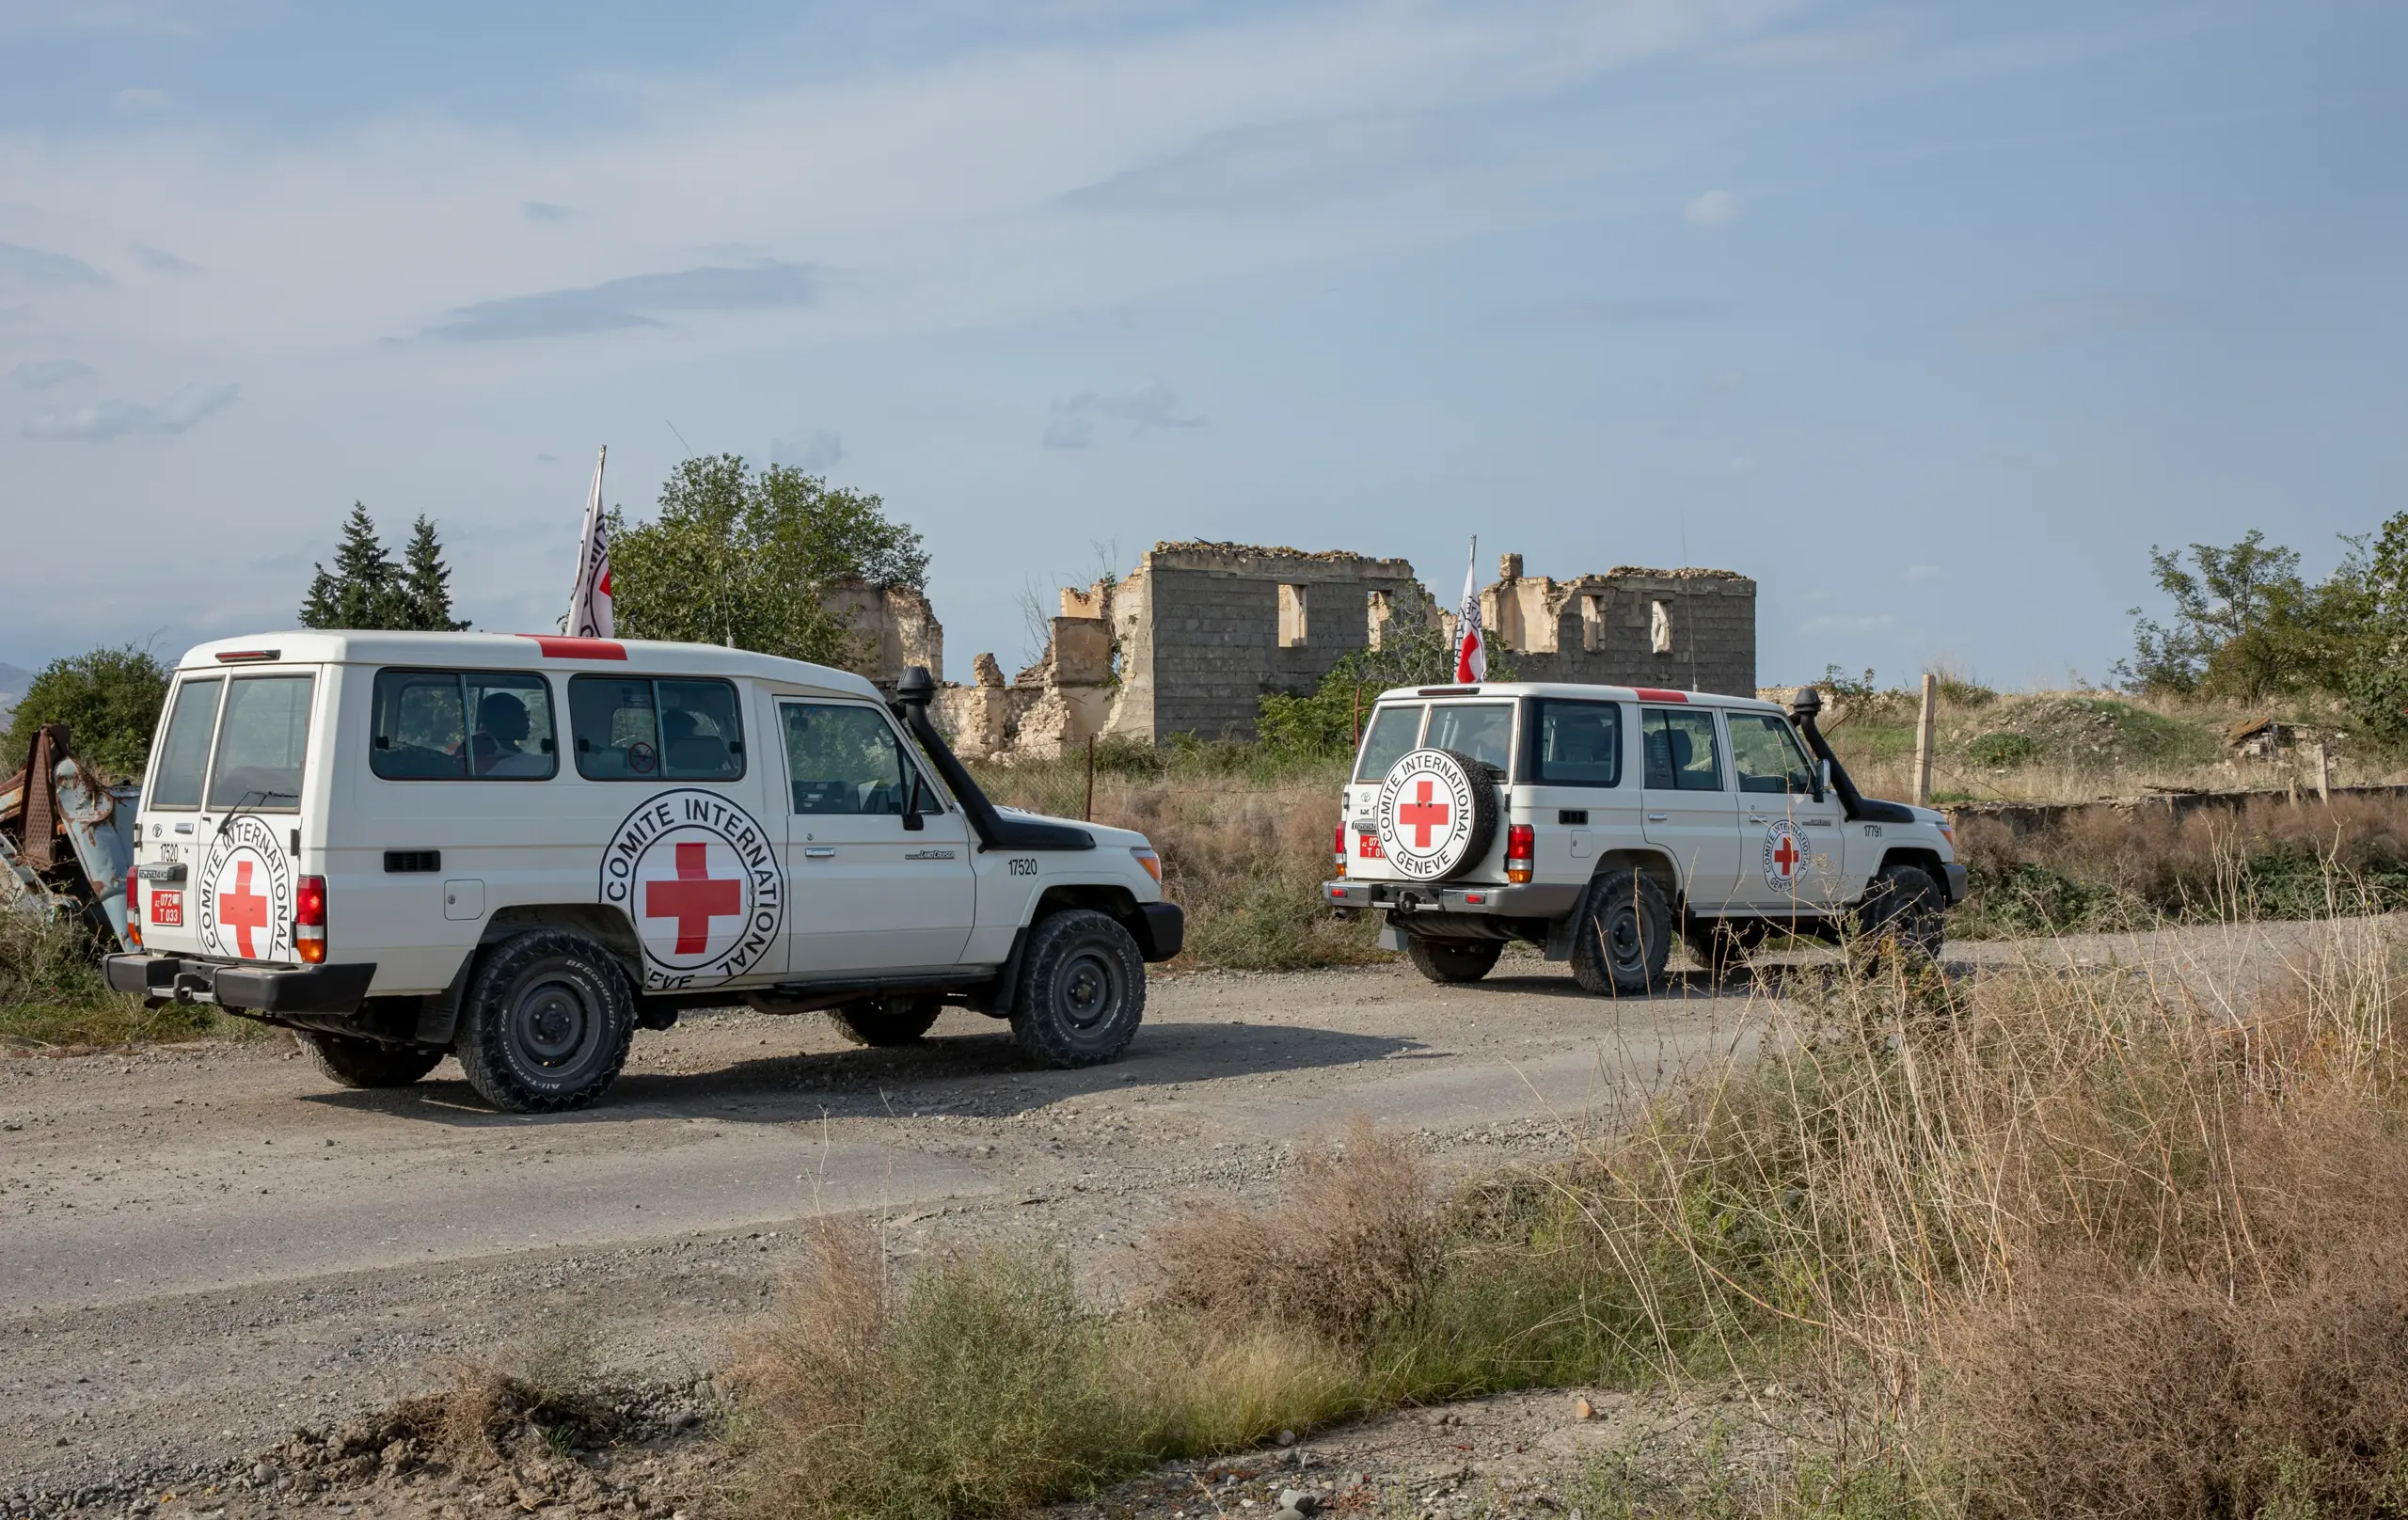 Asana Case Study - International Committee of the Red Cross - Cars